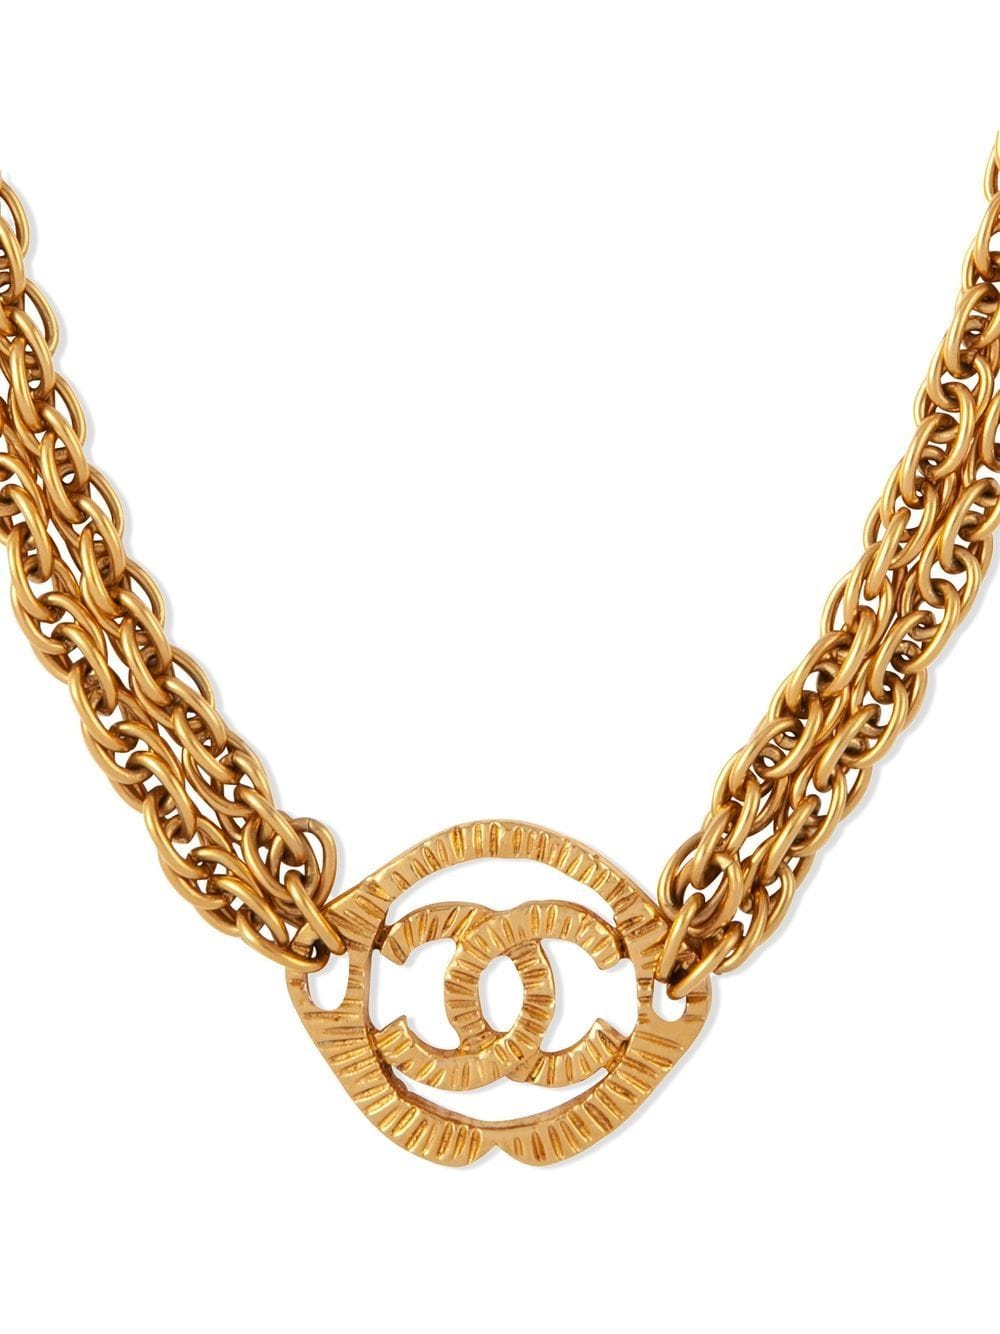 Chanel Pre-Owned 1980s multi-chain medallion necklace - Gold